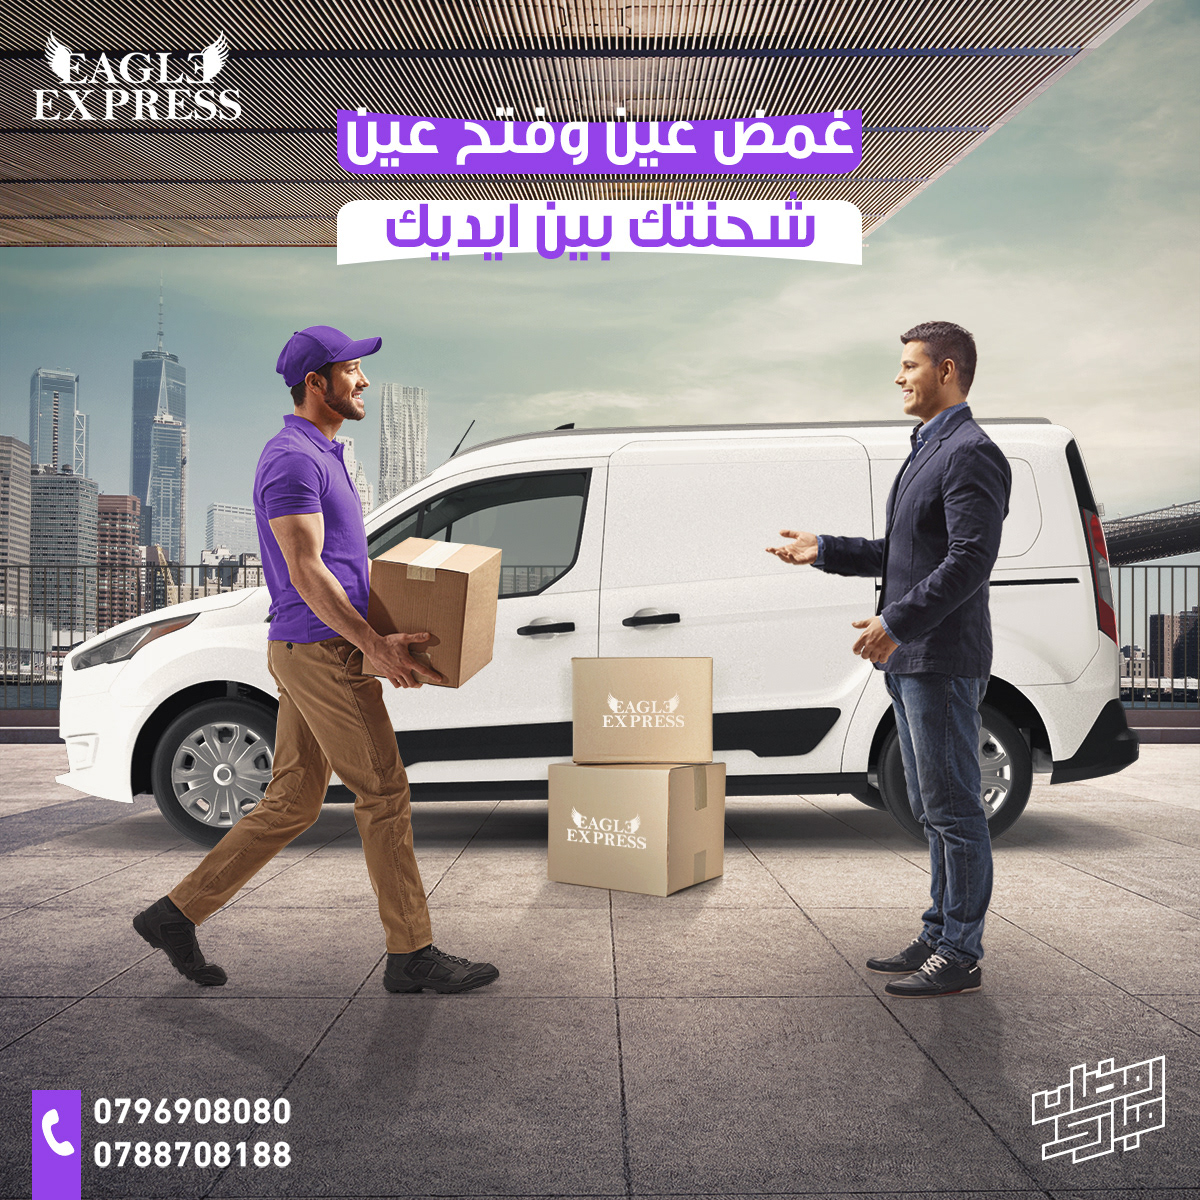 Advertising  campaign delivery design Logistics manipulation marketing   shipping Social media post